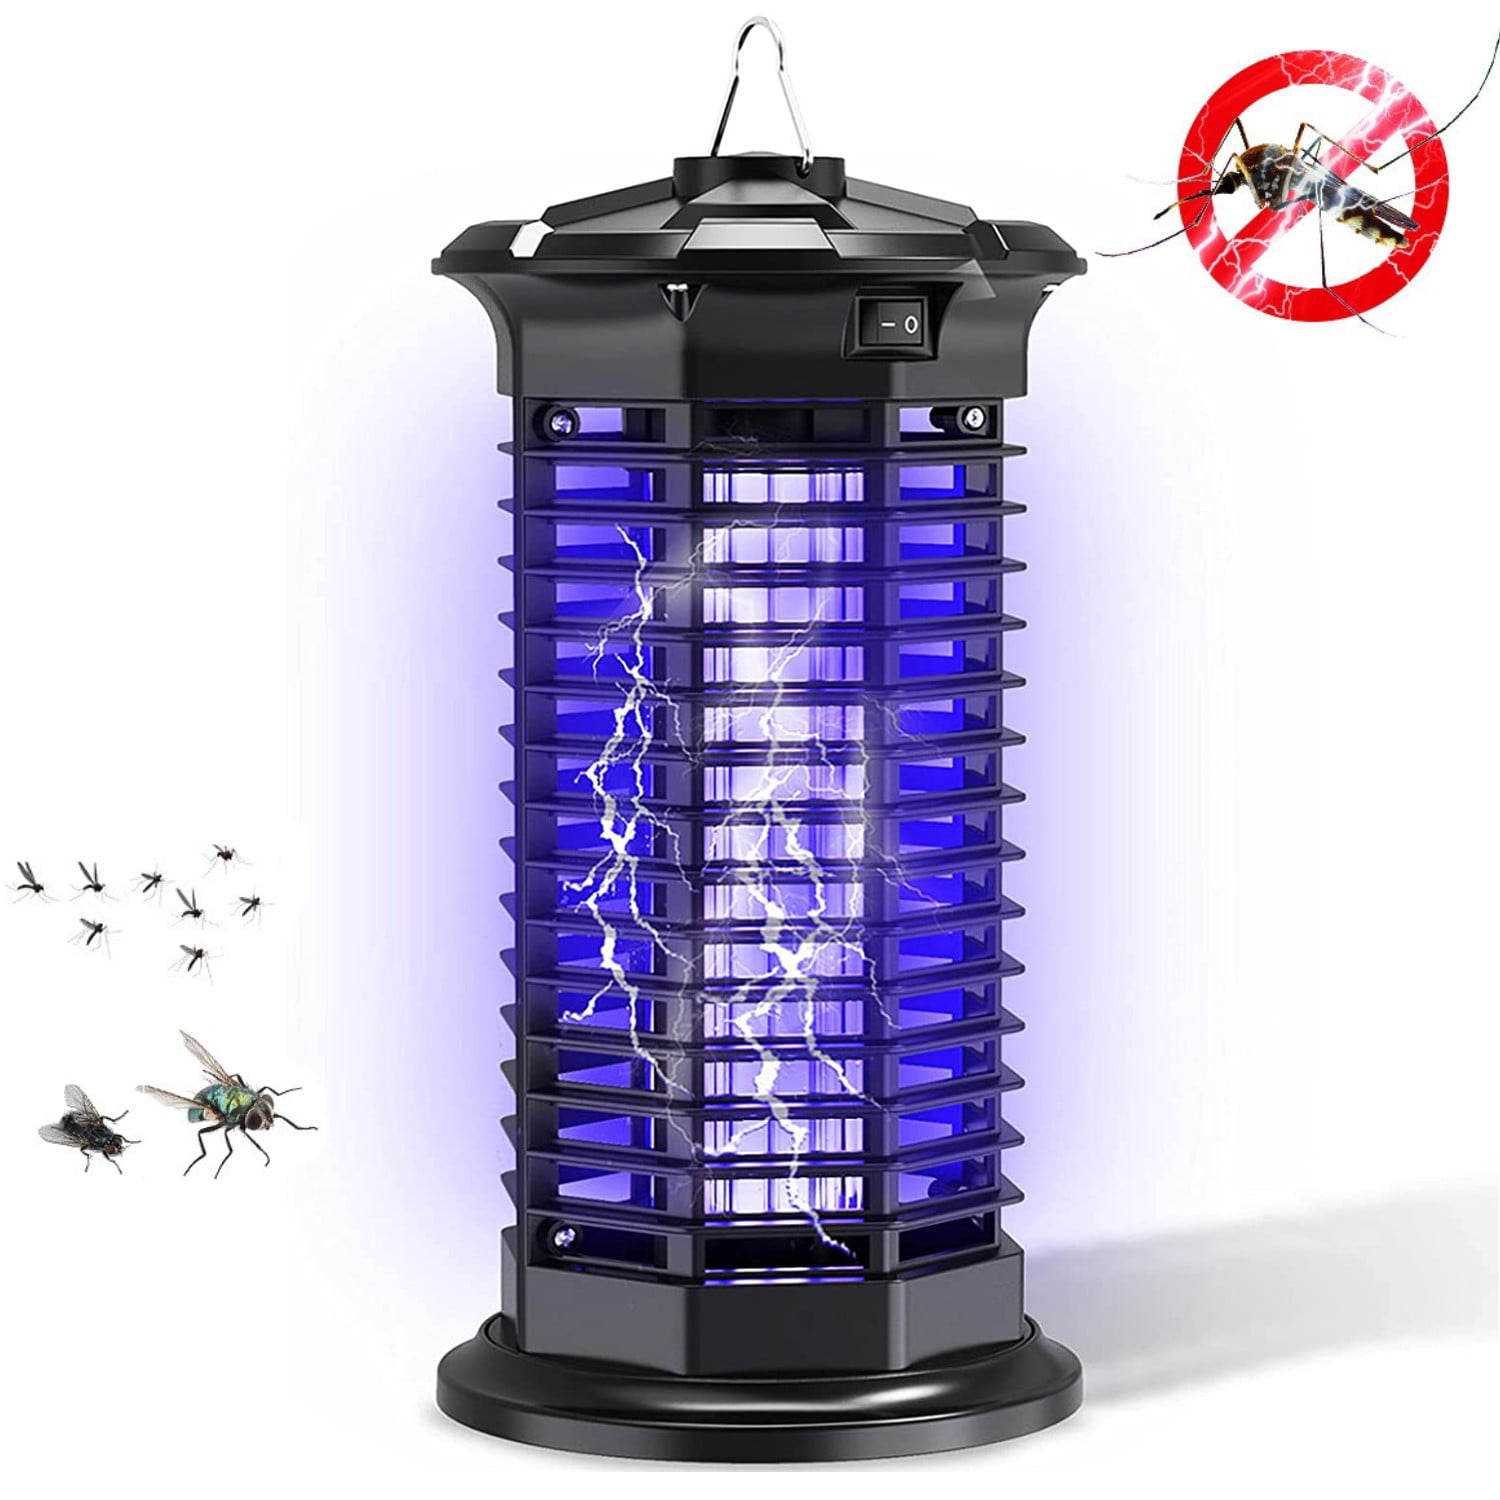 Details about   Indoor Insect Pest Control Electronic Led  Waterproof Mosquito Killer Traps Lamb 